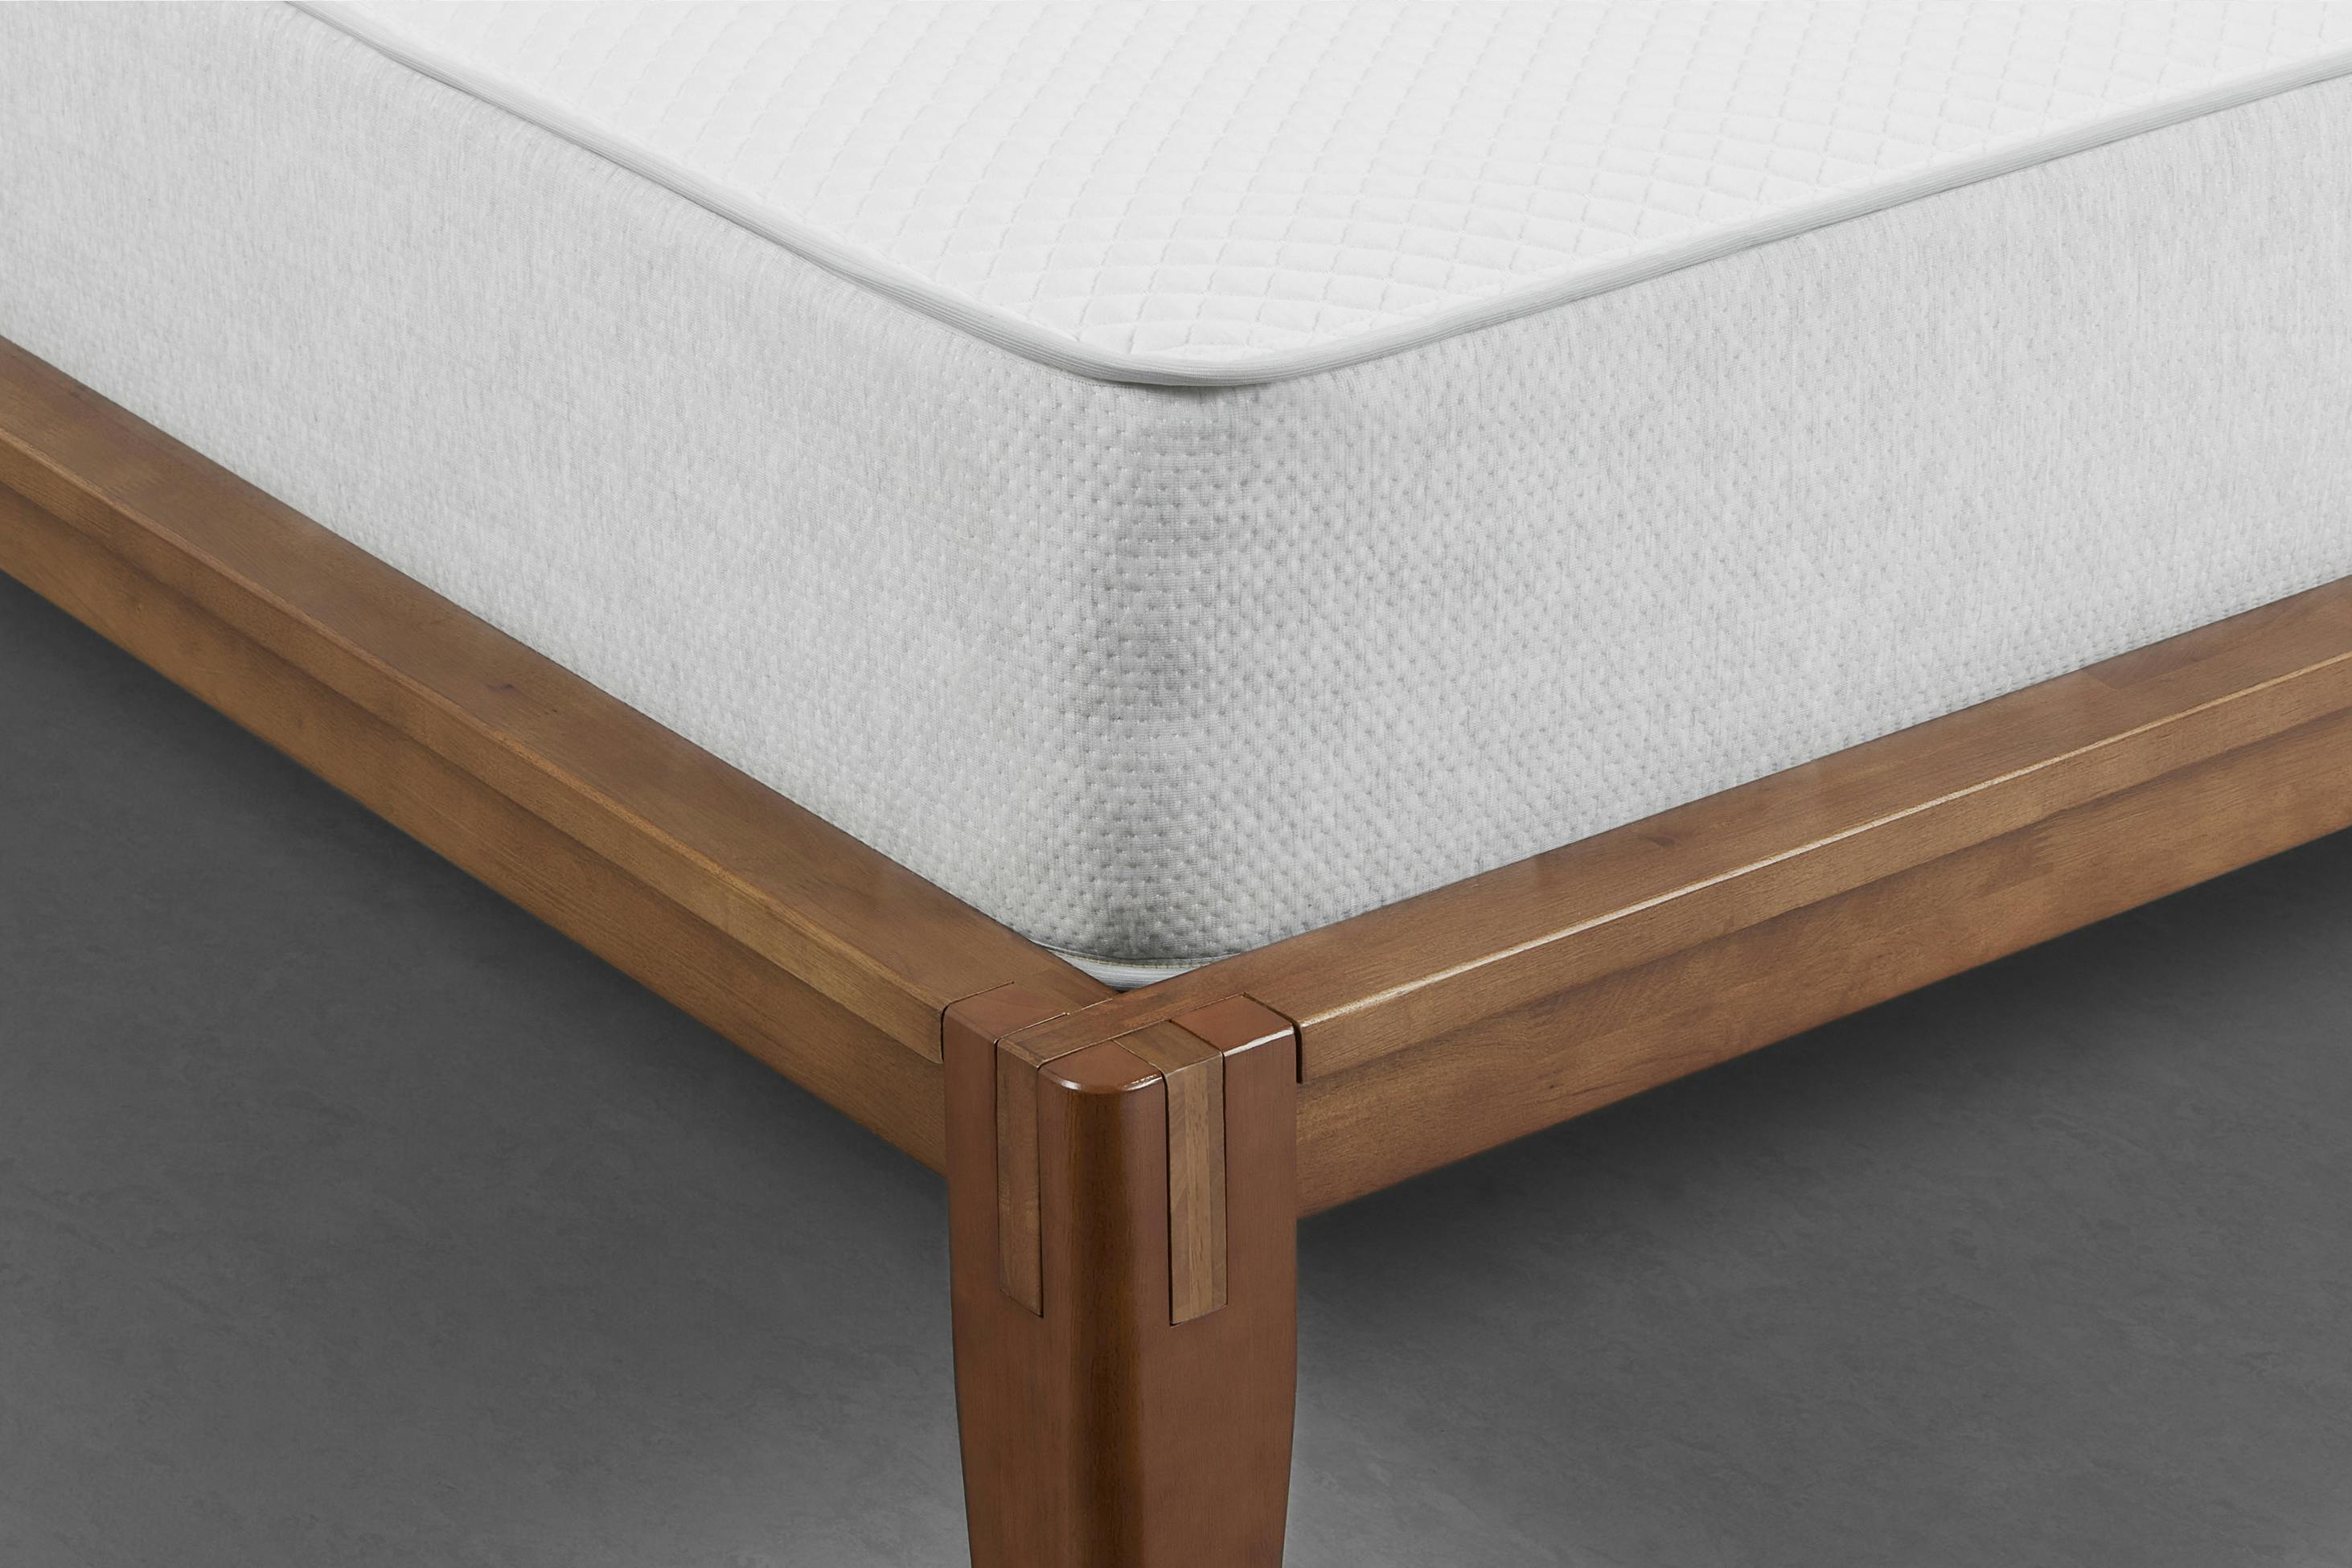 The Mattress Displayed on a Bed Frame